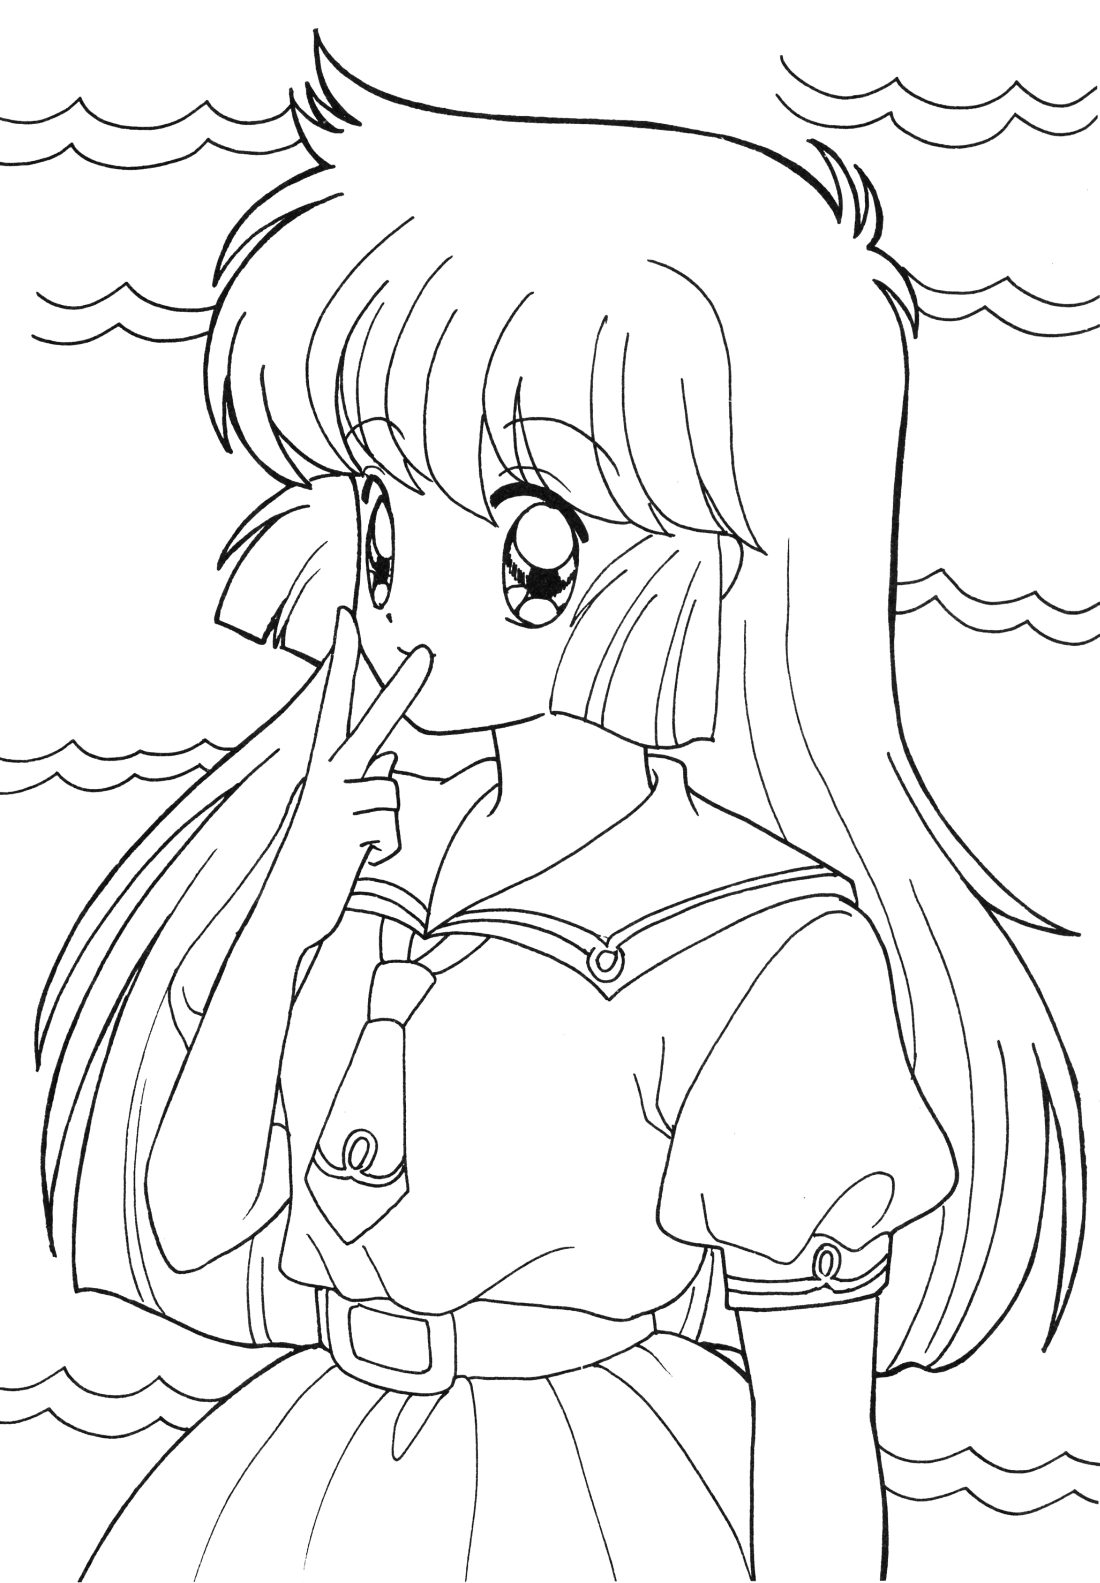 Download Anime Coloring Pages Best Coloring Pages For Kids